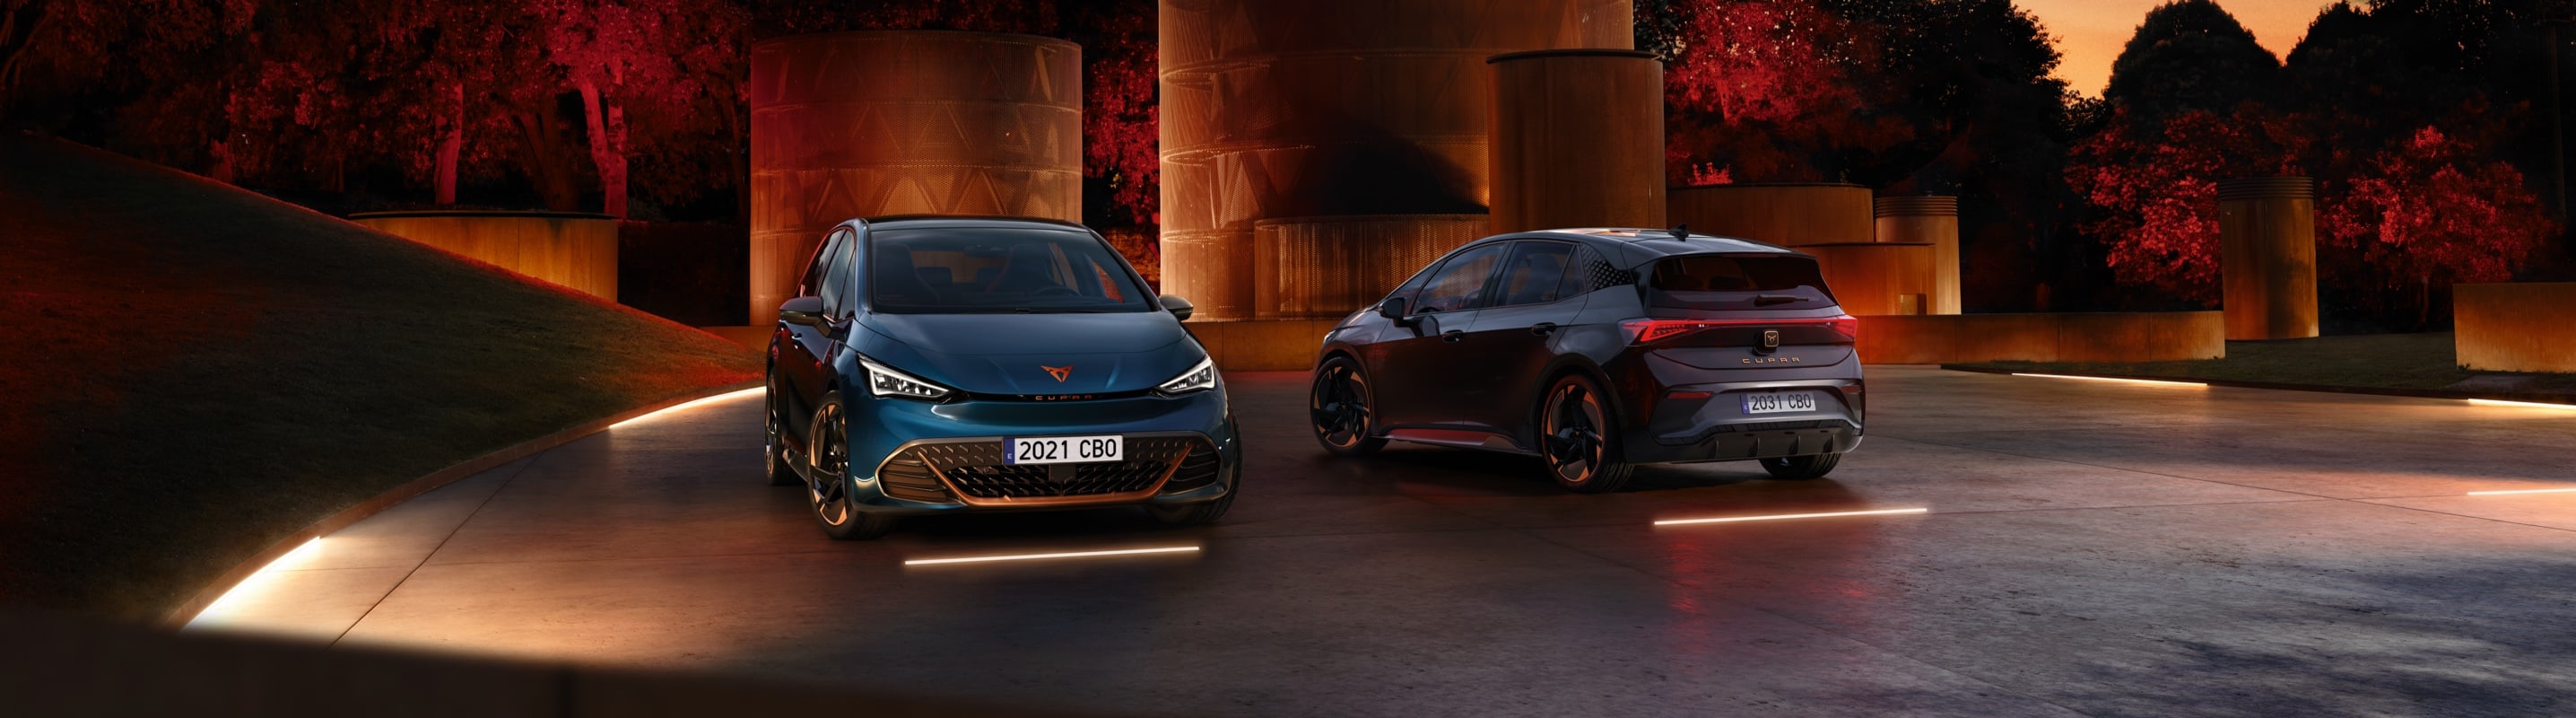 the-new-cupra-forn-aurora-blue-colour-at-a-charging-point 